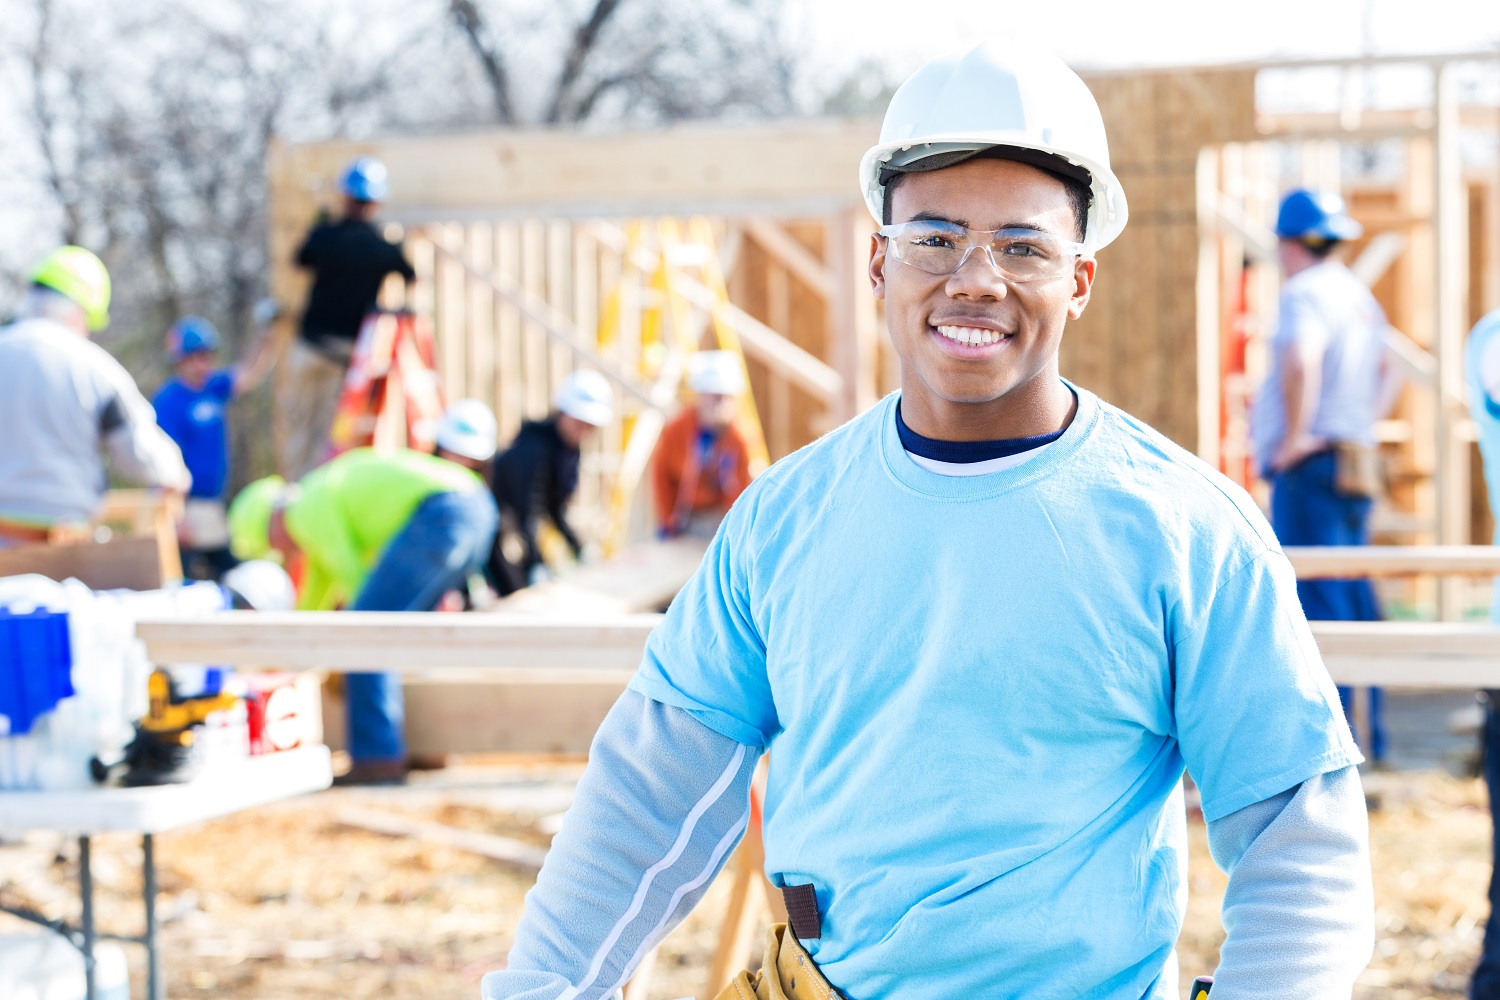 Beazer employee smiling on construction site